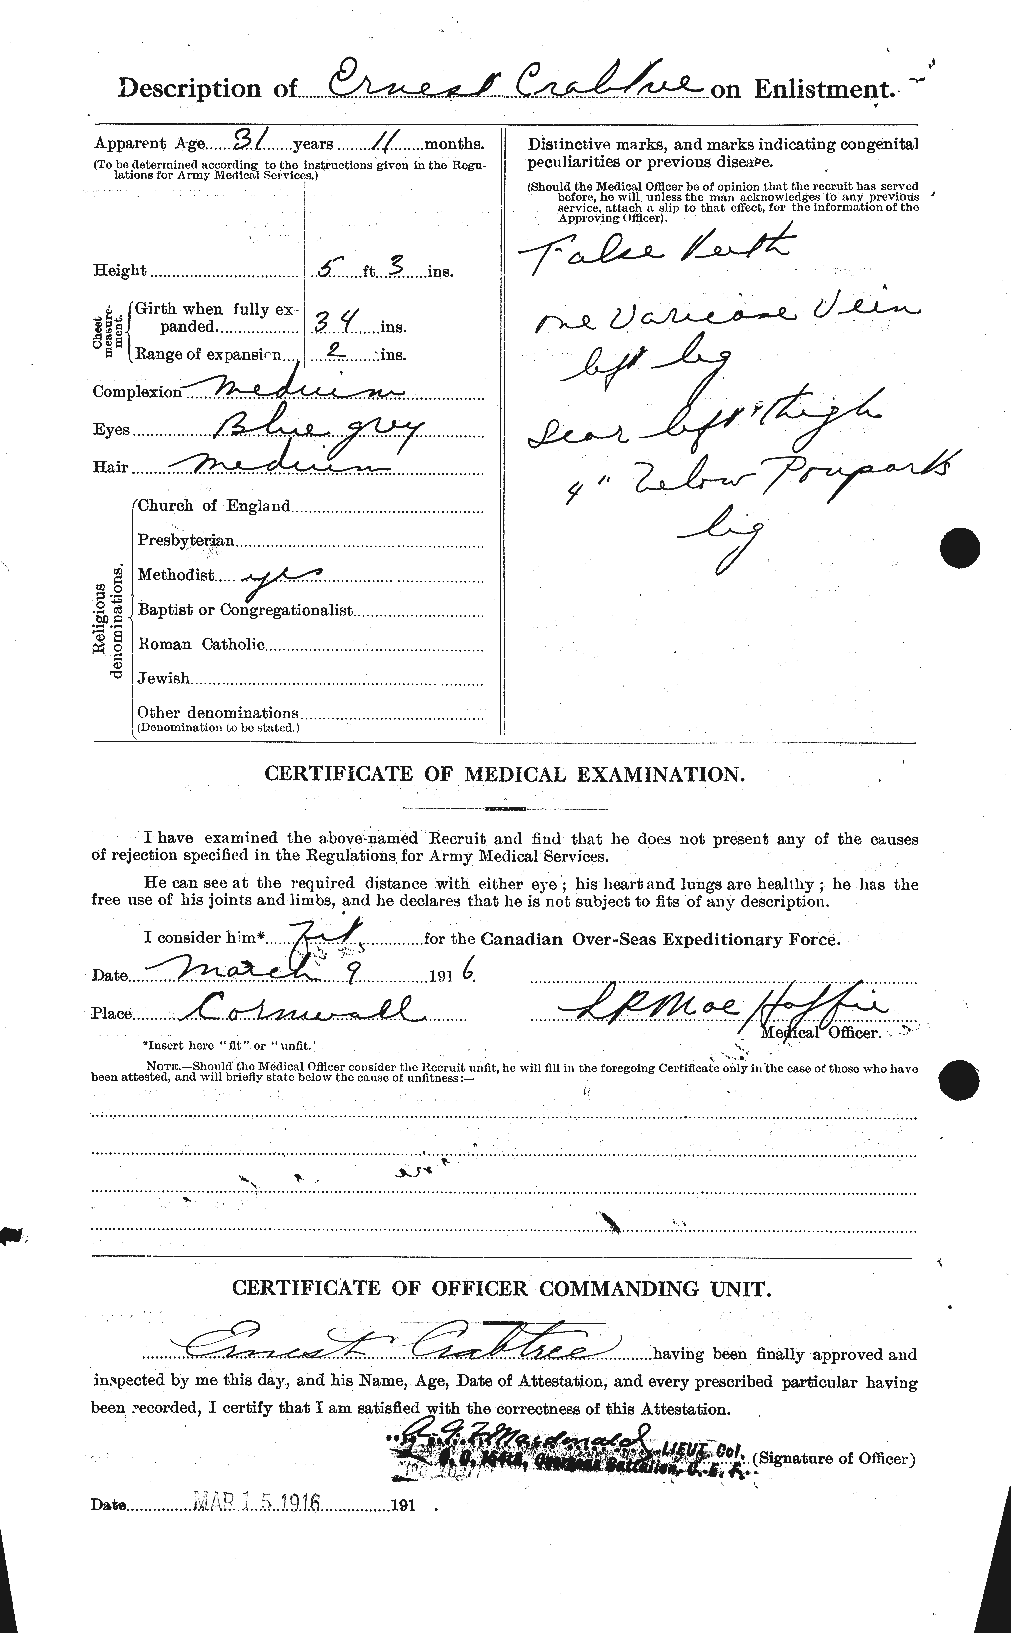 Personnel Records of the First World War - CEF 063332b